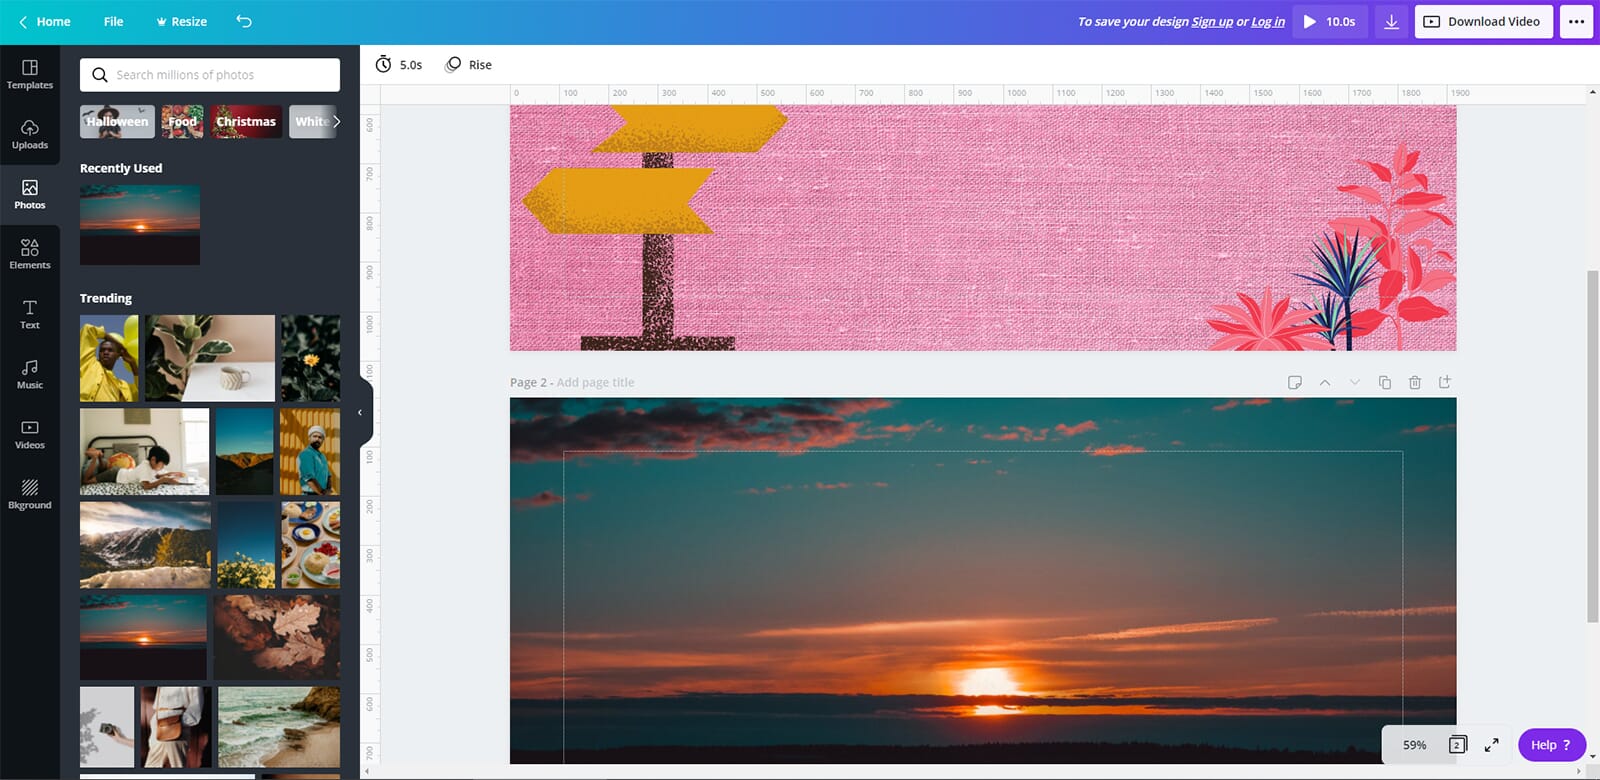 A Canva Slideshow Maker Review: Putting This Online Tool to the Test